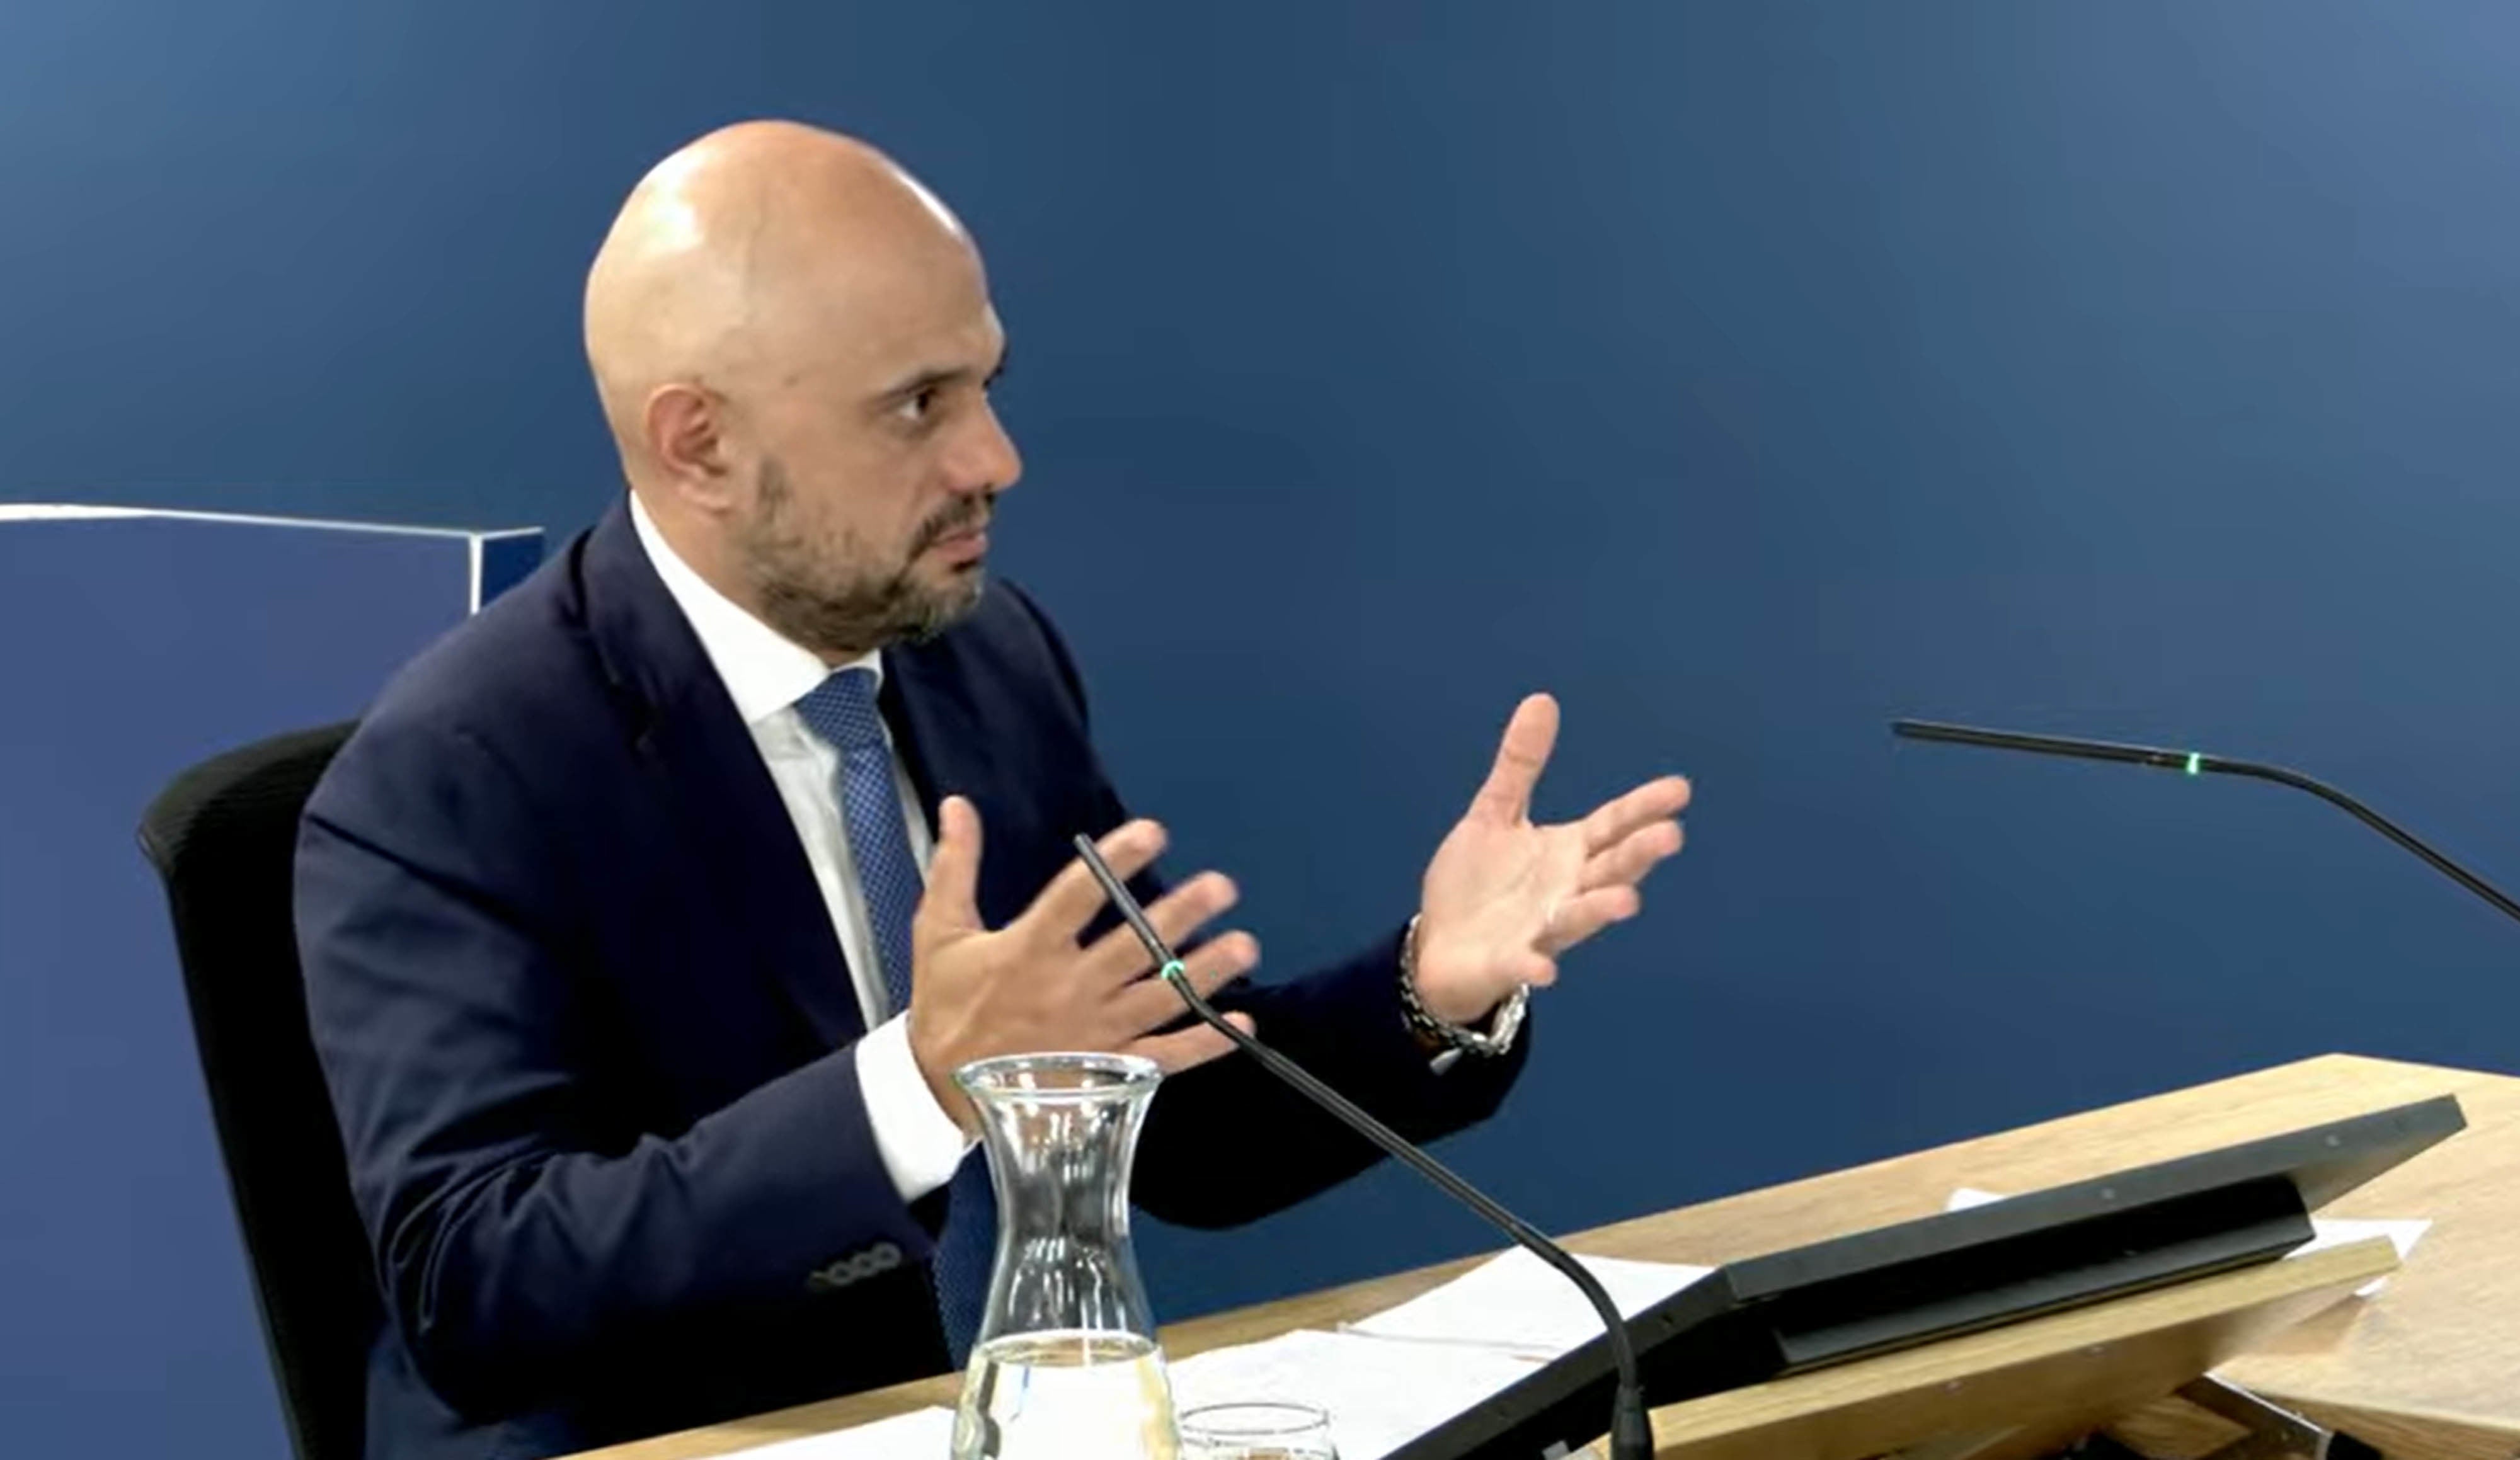 Sajid Javid says he agrees with claims there was a toxic culture in No 10